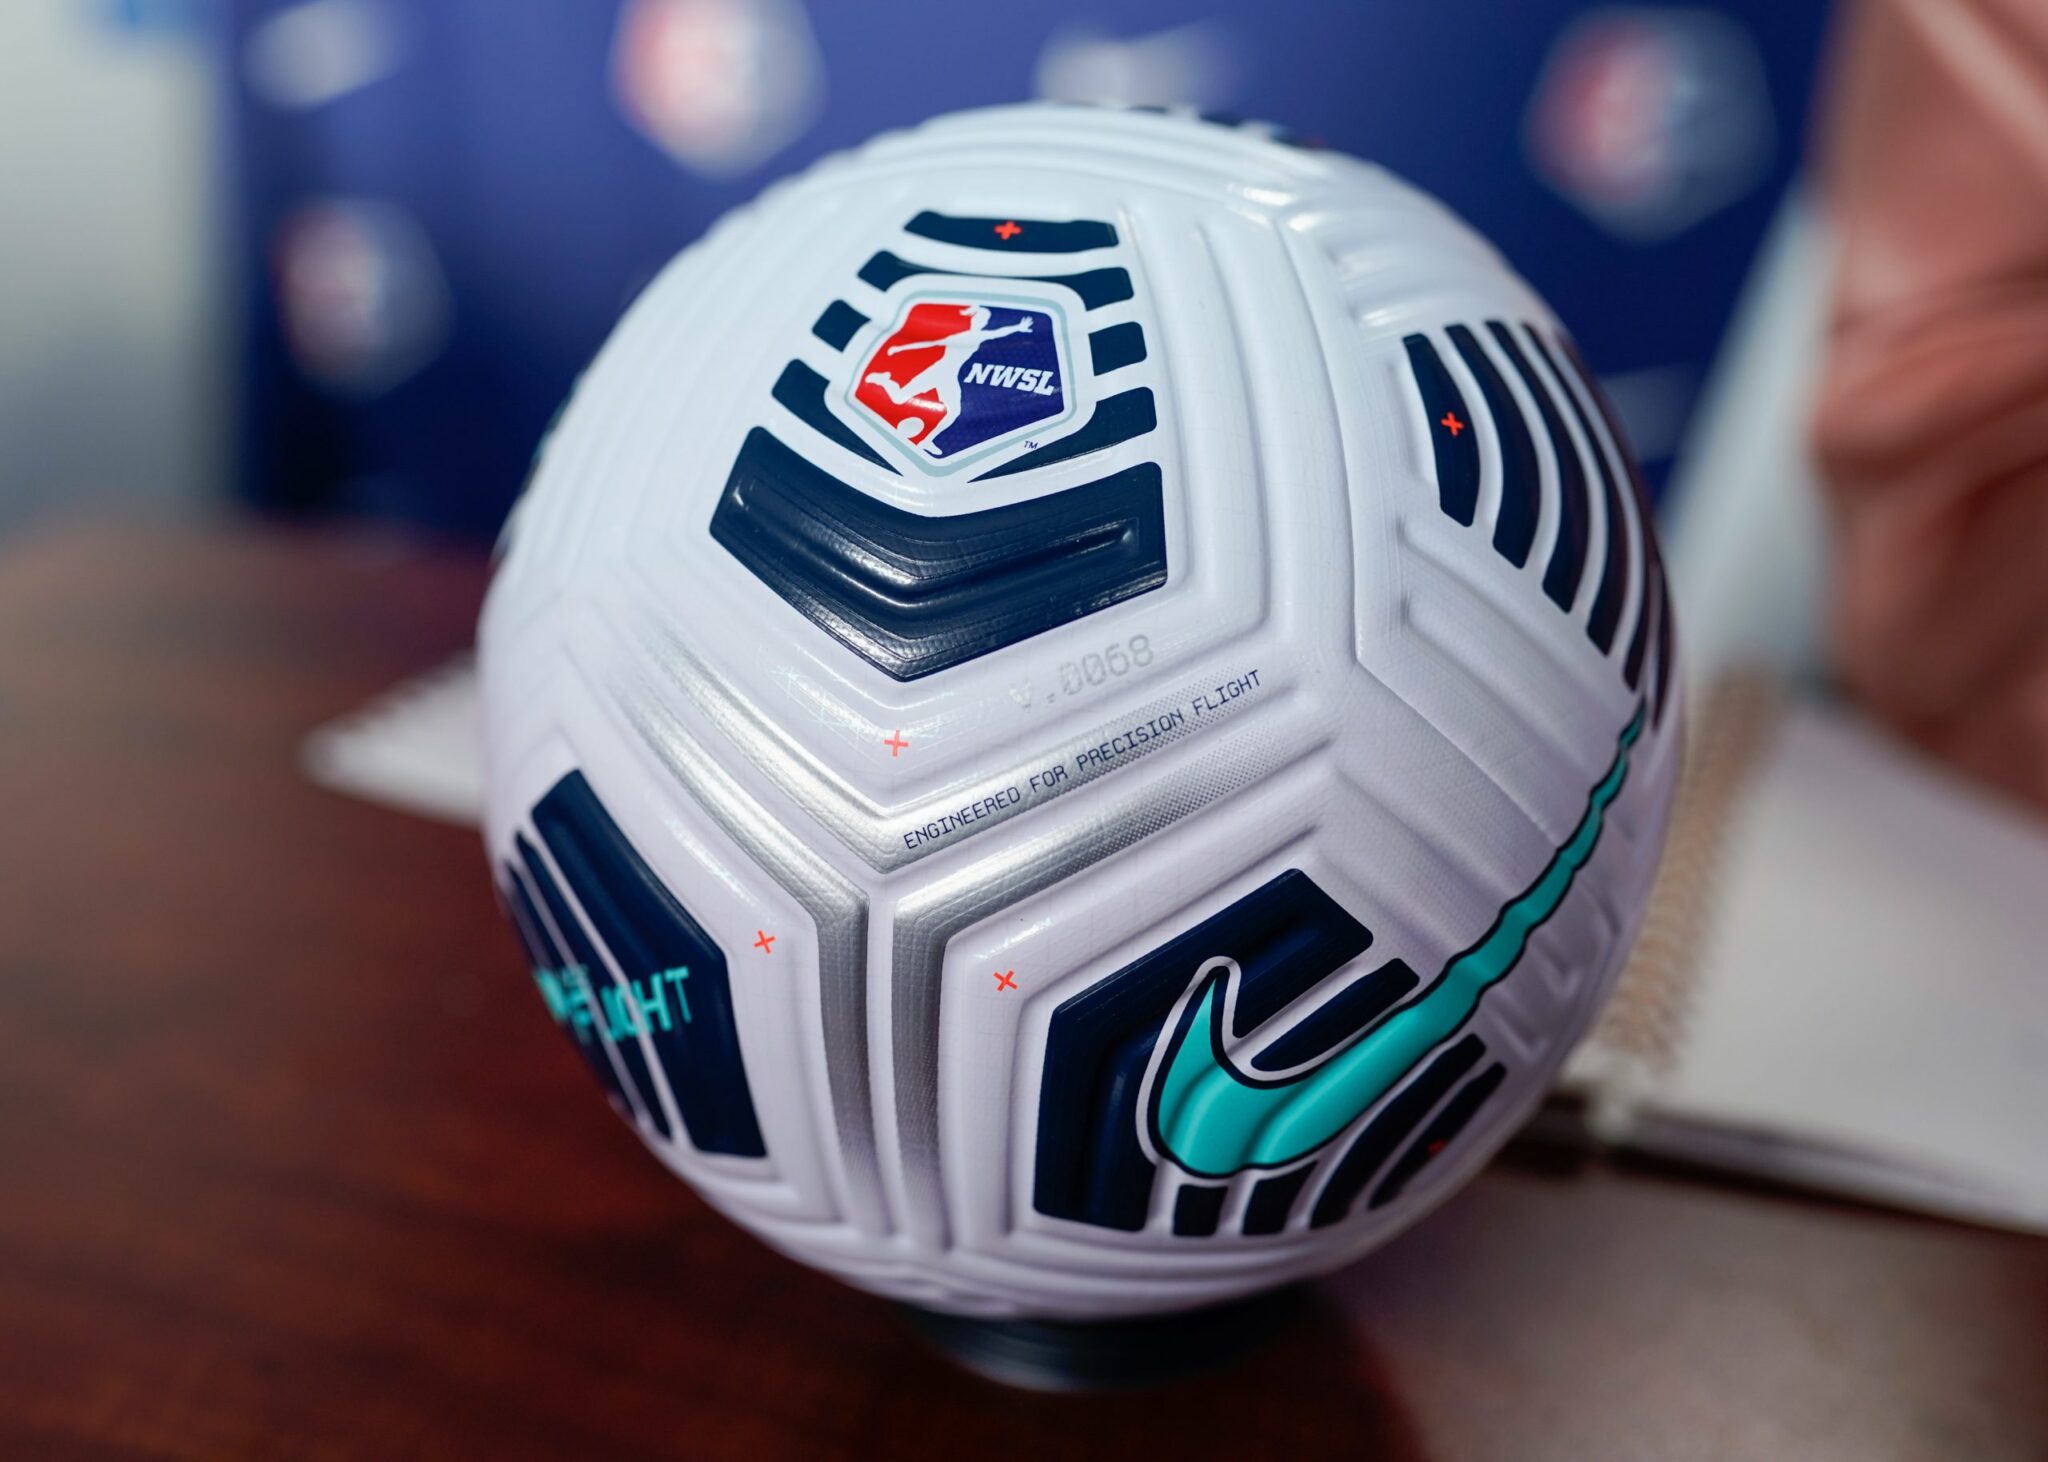 NWSL Announces Dates For the 2022 NWSL Expansion Draft and NWSL Draft Presented By Ally, Opens Player Registration Featured Image